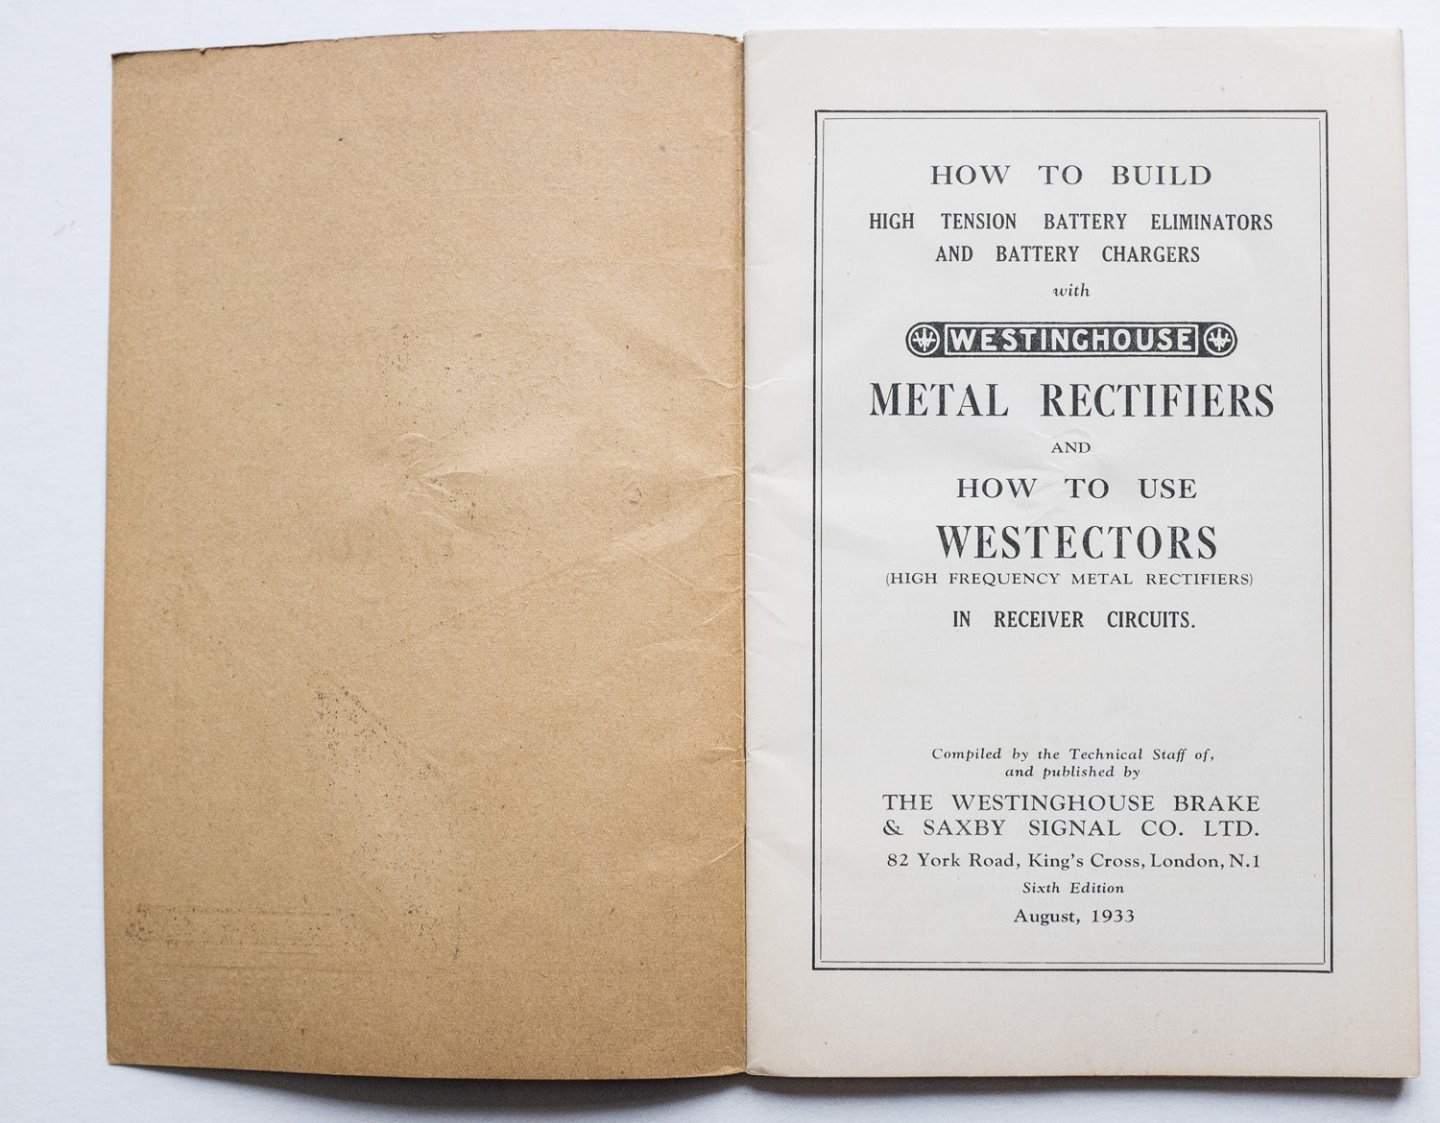  - The all-metal way 1934 -  How to build high tension battery eliminators and battery chargers with Westinghouse metal rectifiers and how to use westectors (high frequency metal rectifiers) in receiver circuits